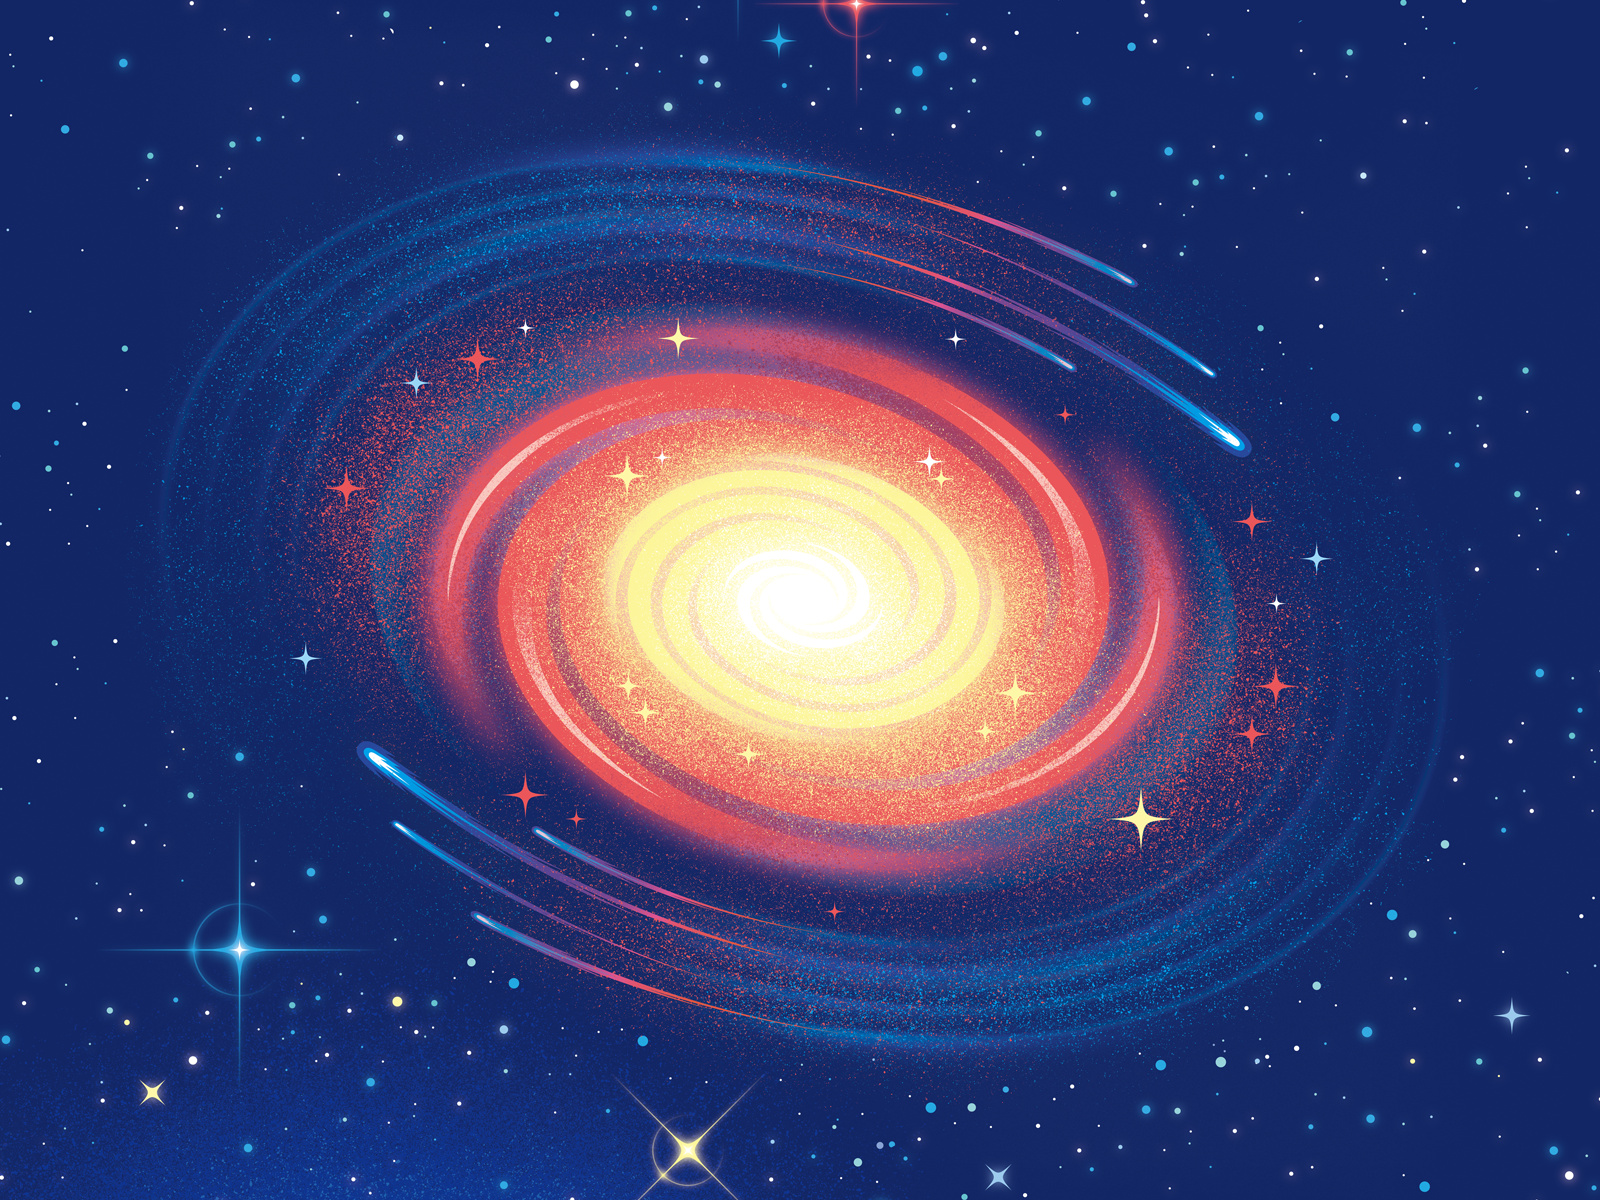 Captain's Log - Entry 9: Black Hole 💫 aerospace astronomy astrophysics black hole cosmic cosmos galaxy gravity illustration illustrator milky way nasa outer space san diego sci-fi solar system space travel space x universe wormhole